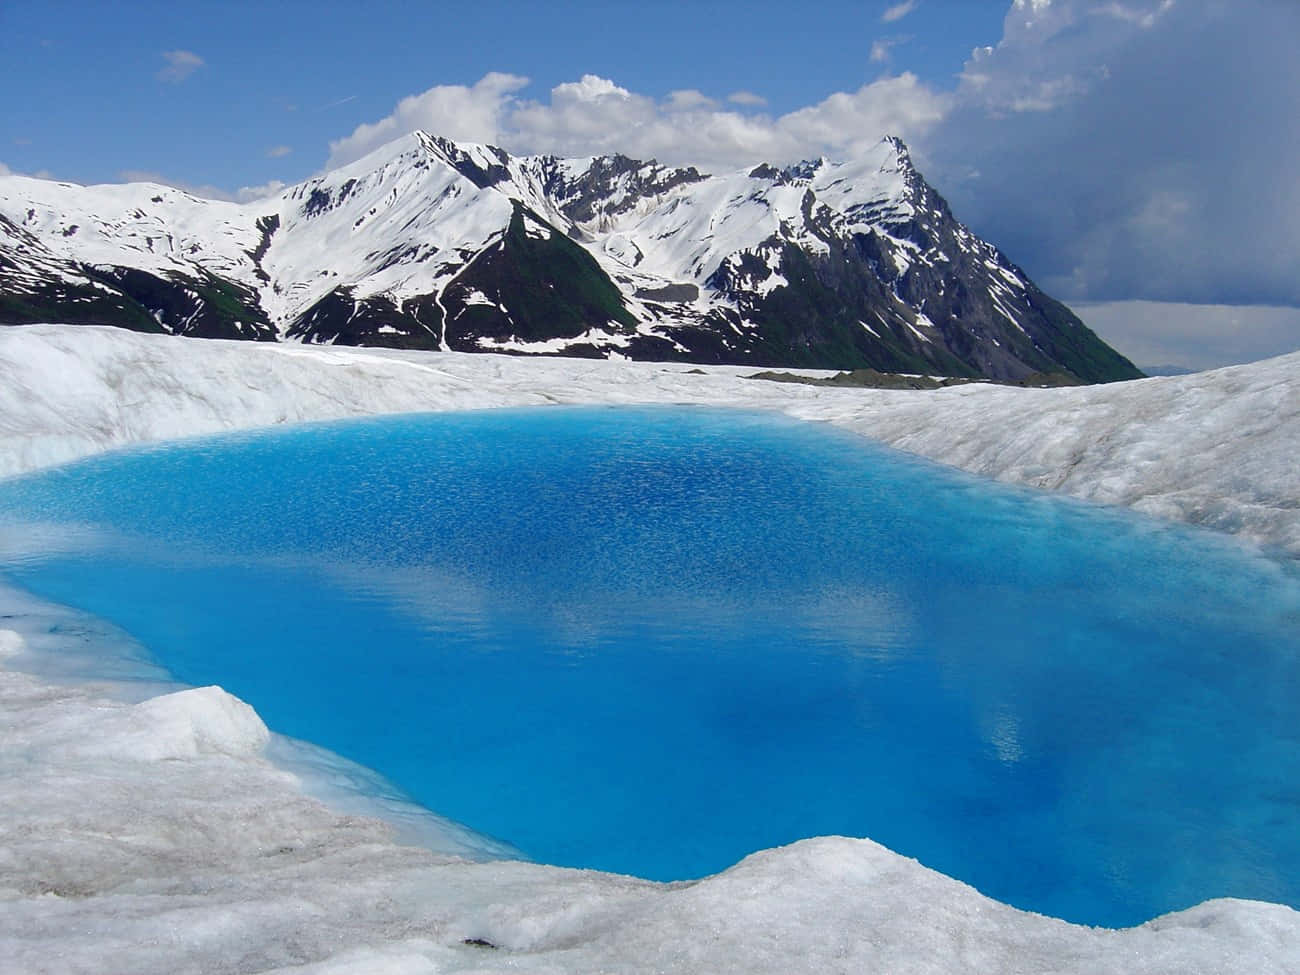 Glacial_ Blue_ Pond_ Amidst_ Snowy_ Mountains.jpg Wallpaper